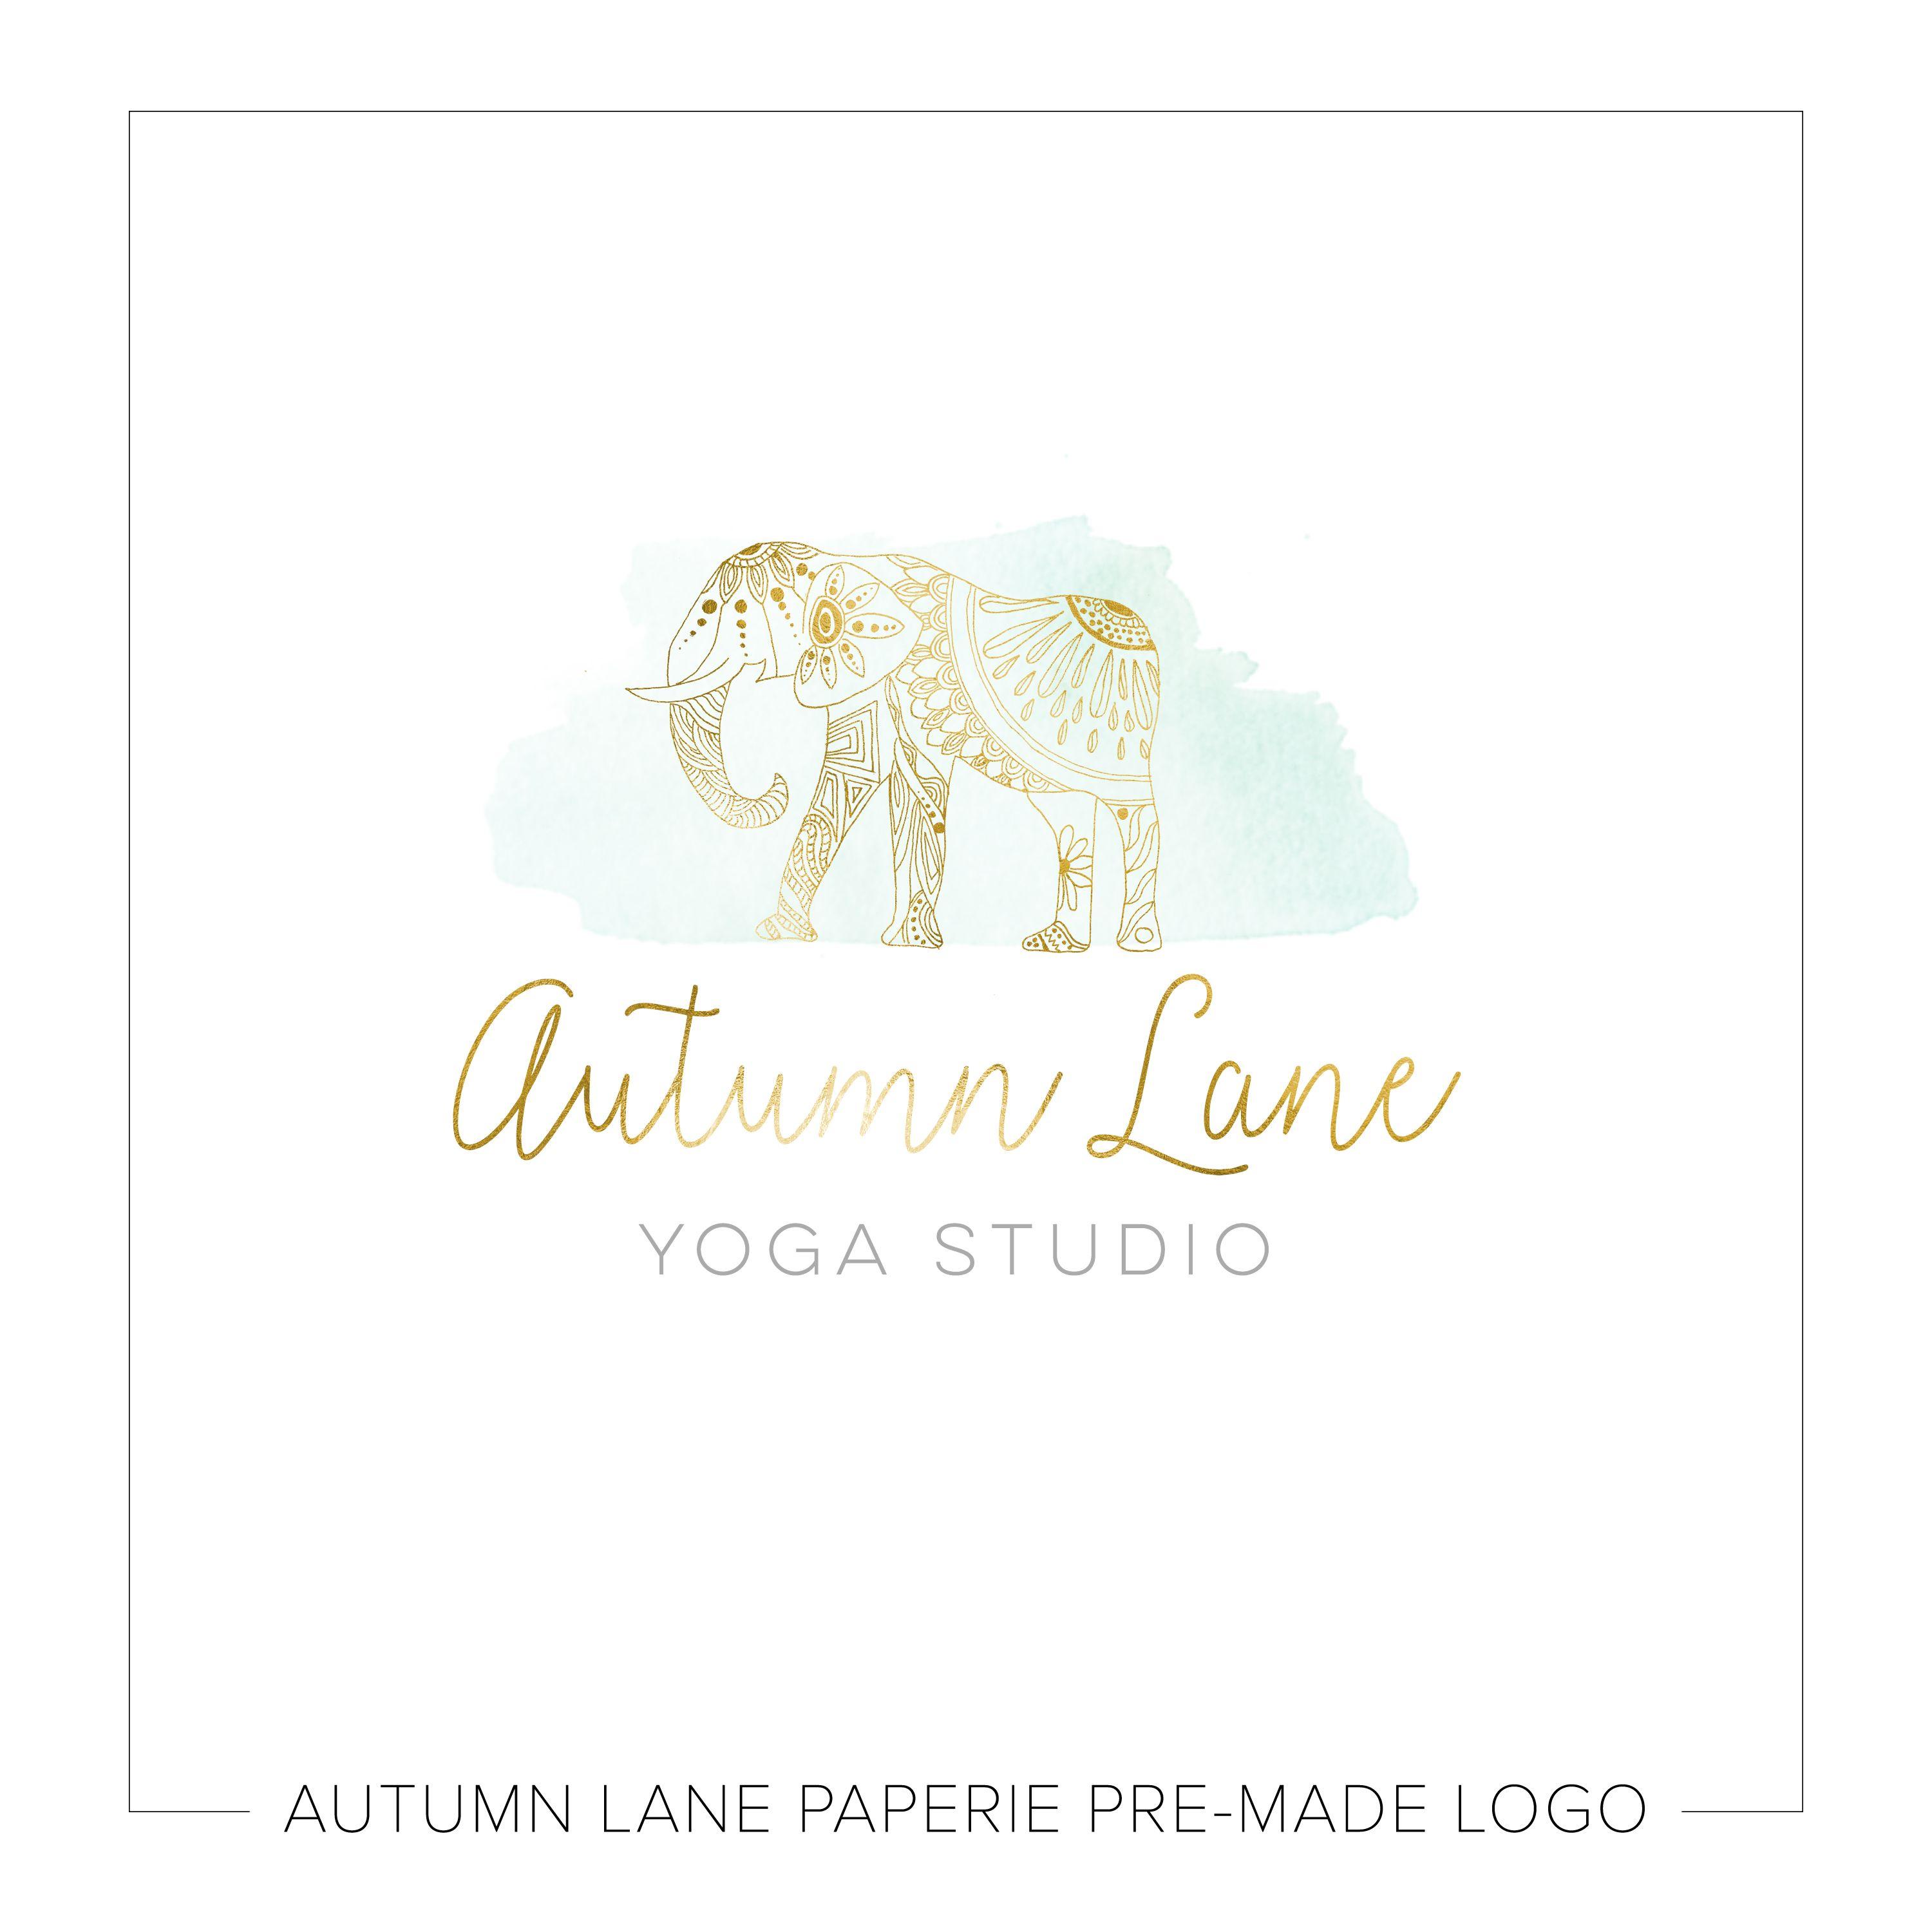 Teal and Gold Logo - Soft Teal & Gold Elephant Logo K61. Autumn Lane Paperie